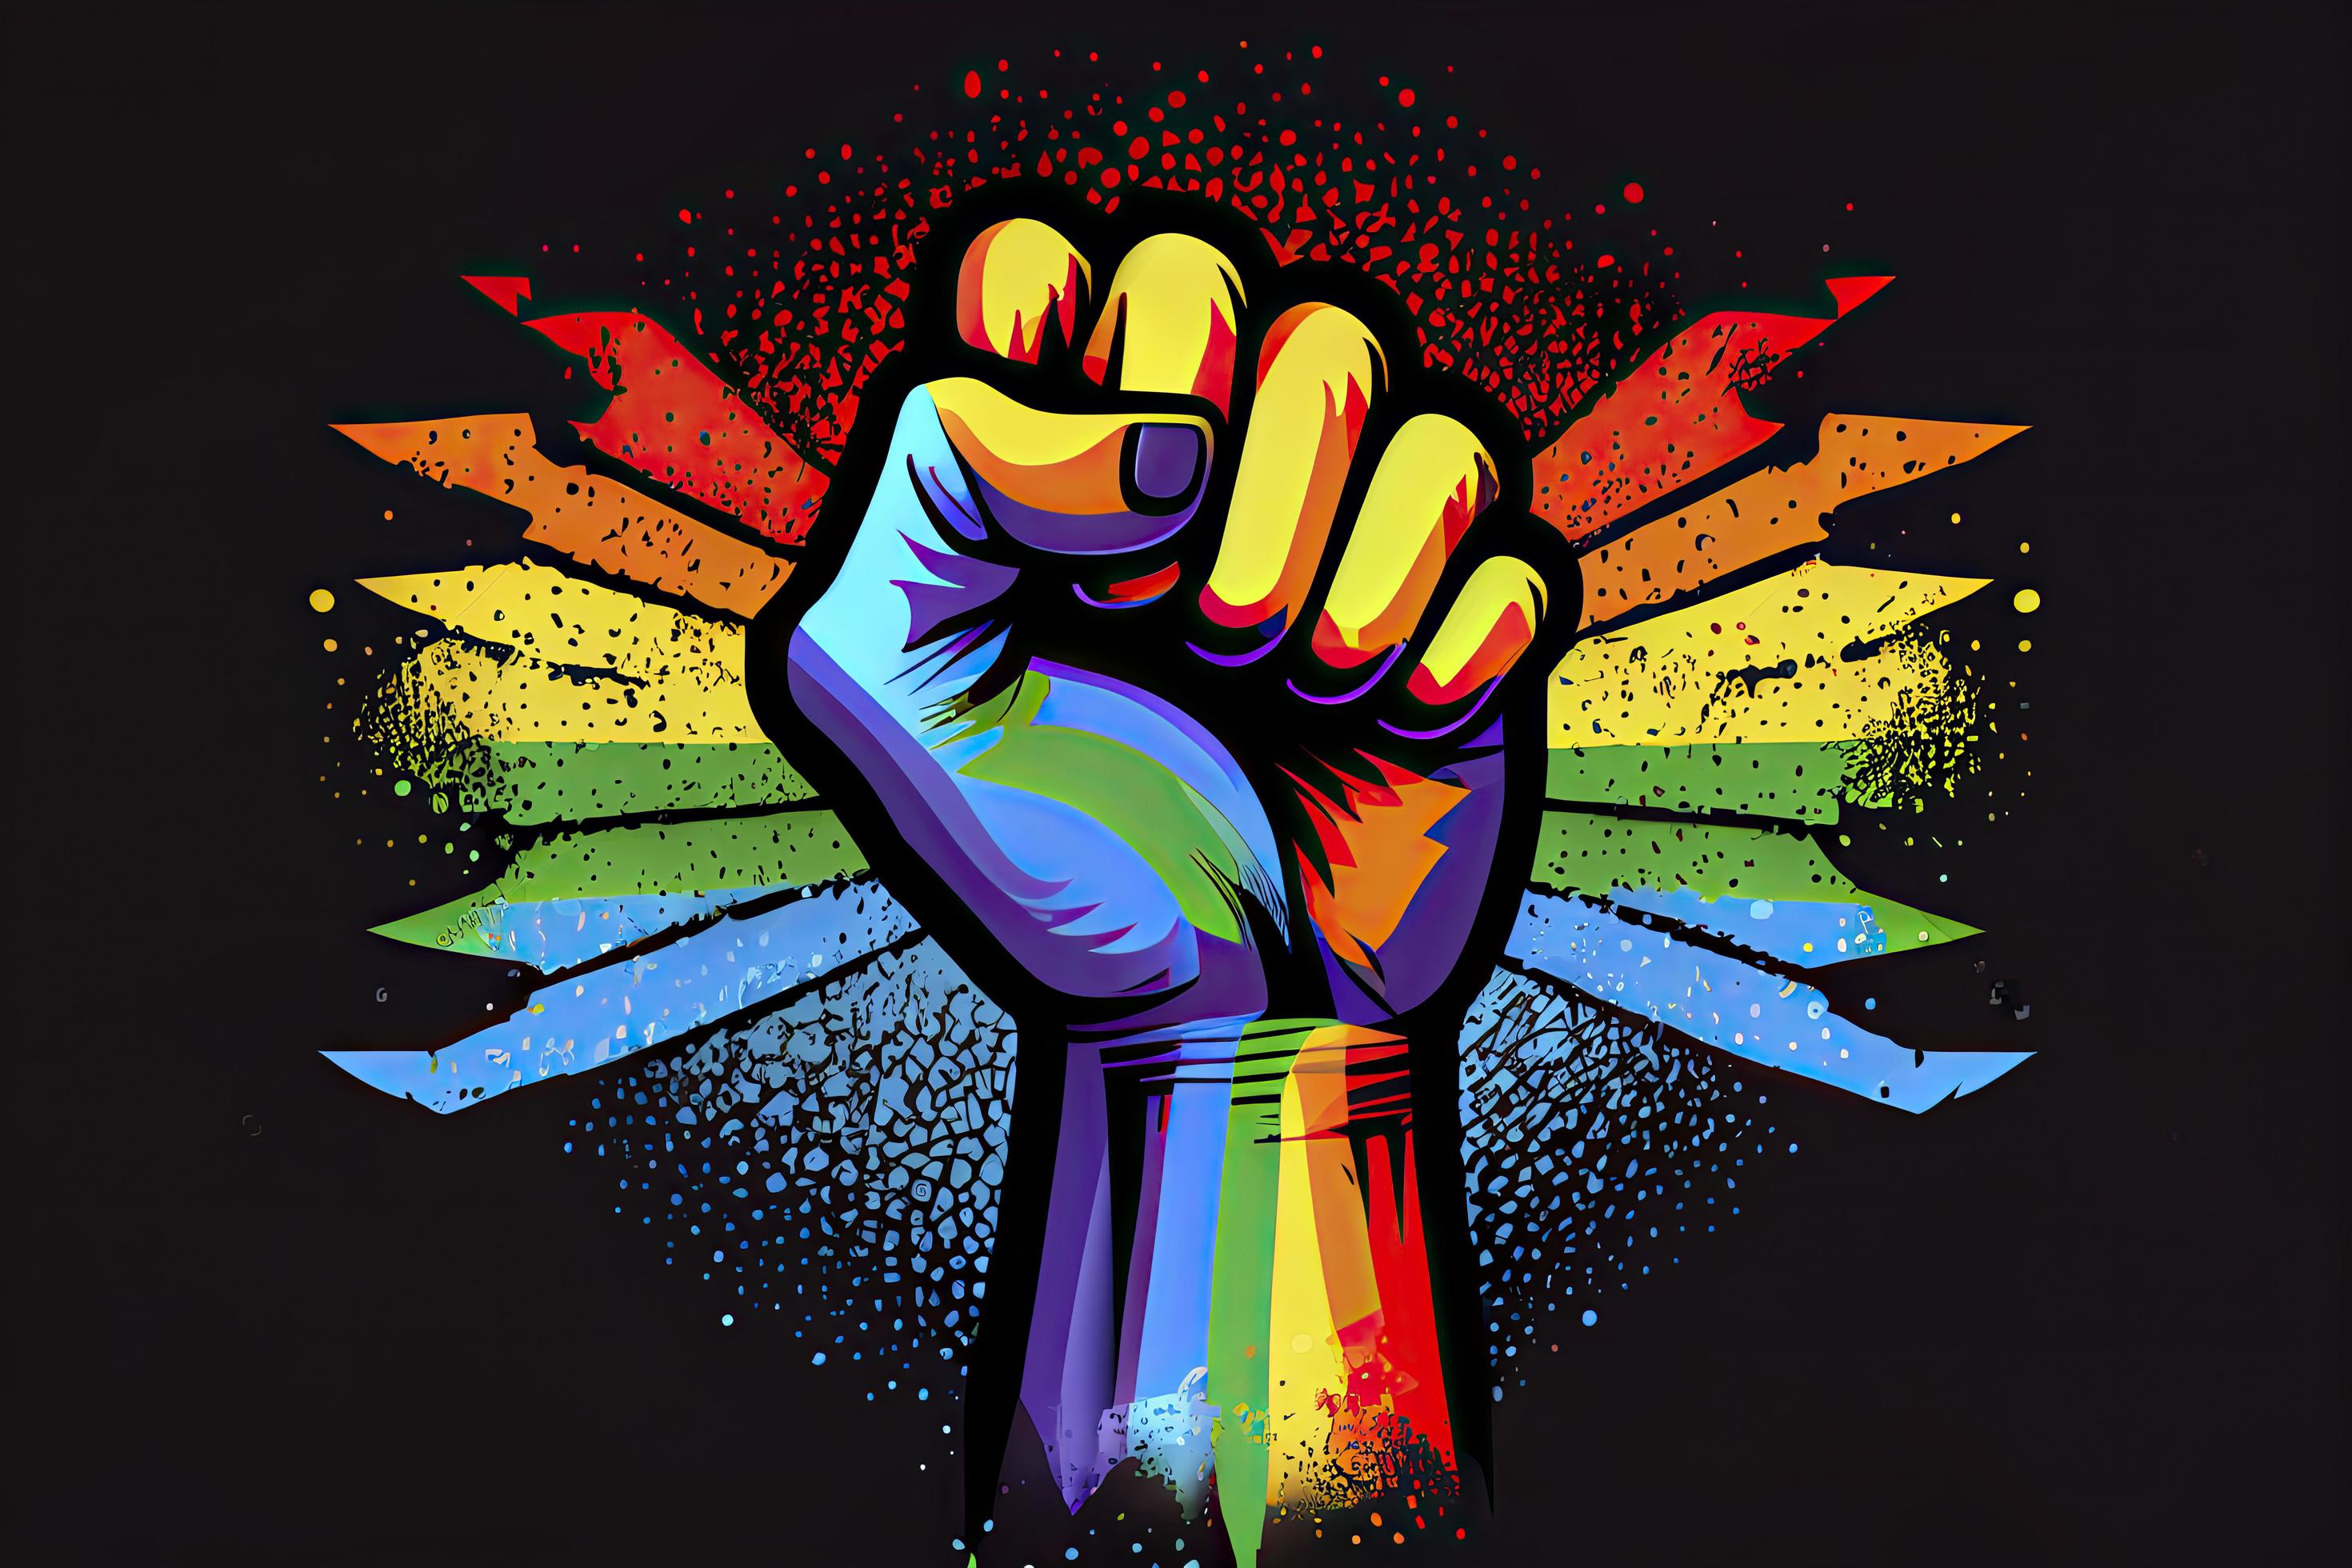 https://static.vecteezy.com/system/resources/previews/022/506/679/large_2x/rainbow-colored-hand-with-a-fist-raised-up-gay-pride-lgbt-concept-free-photo.jpg